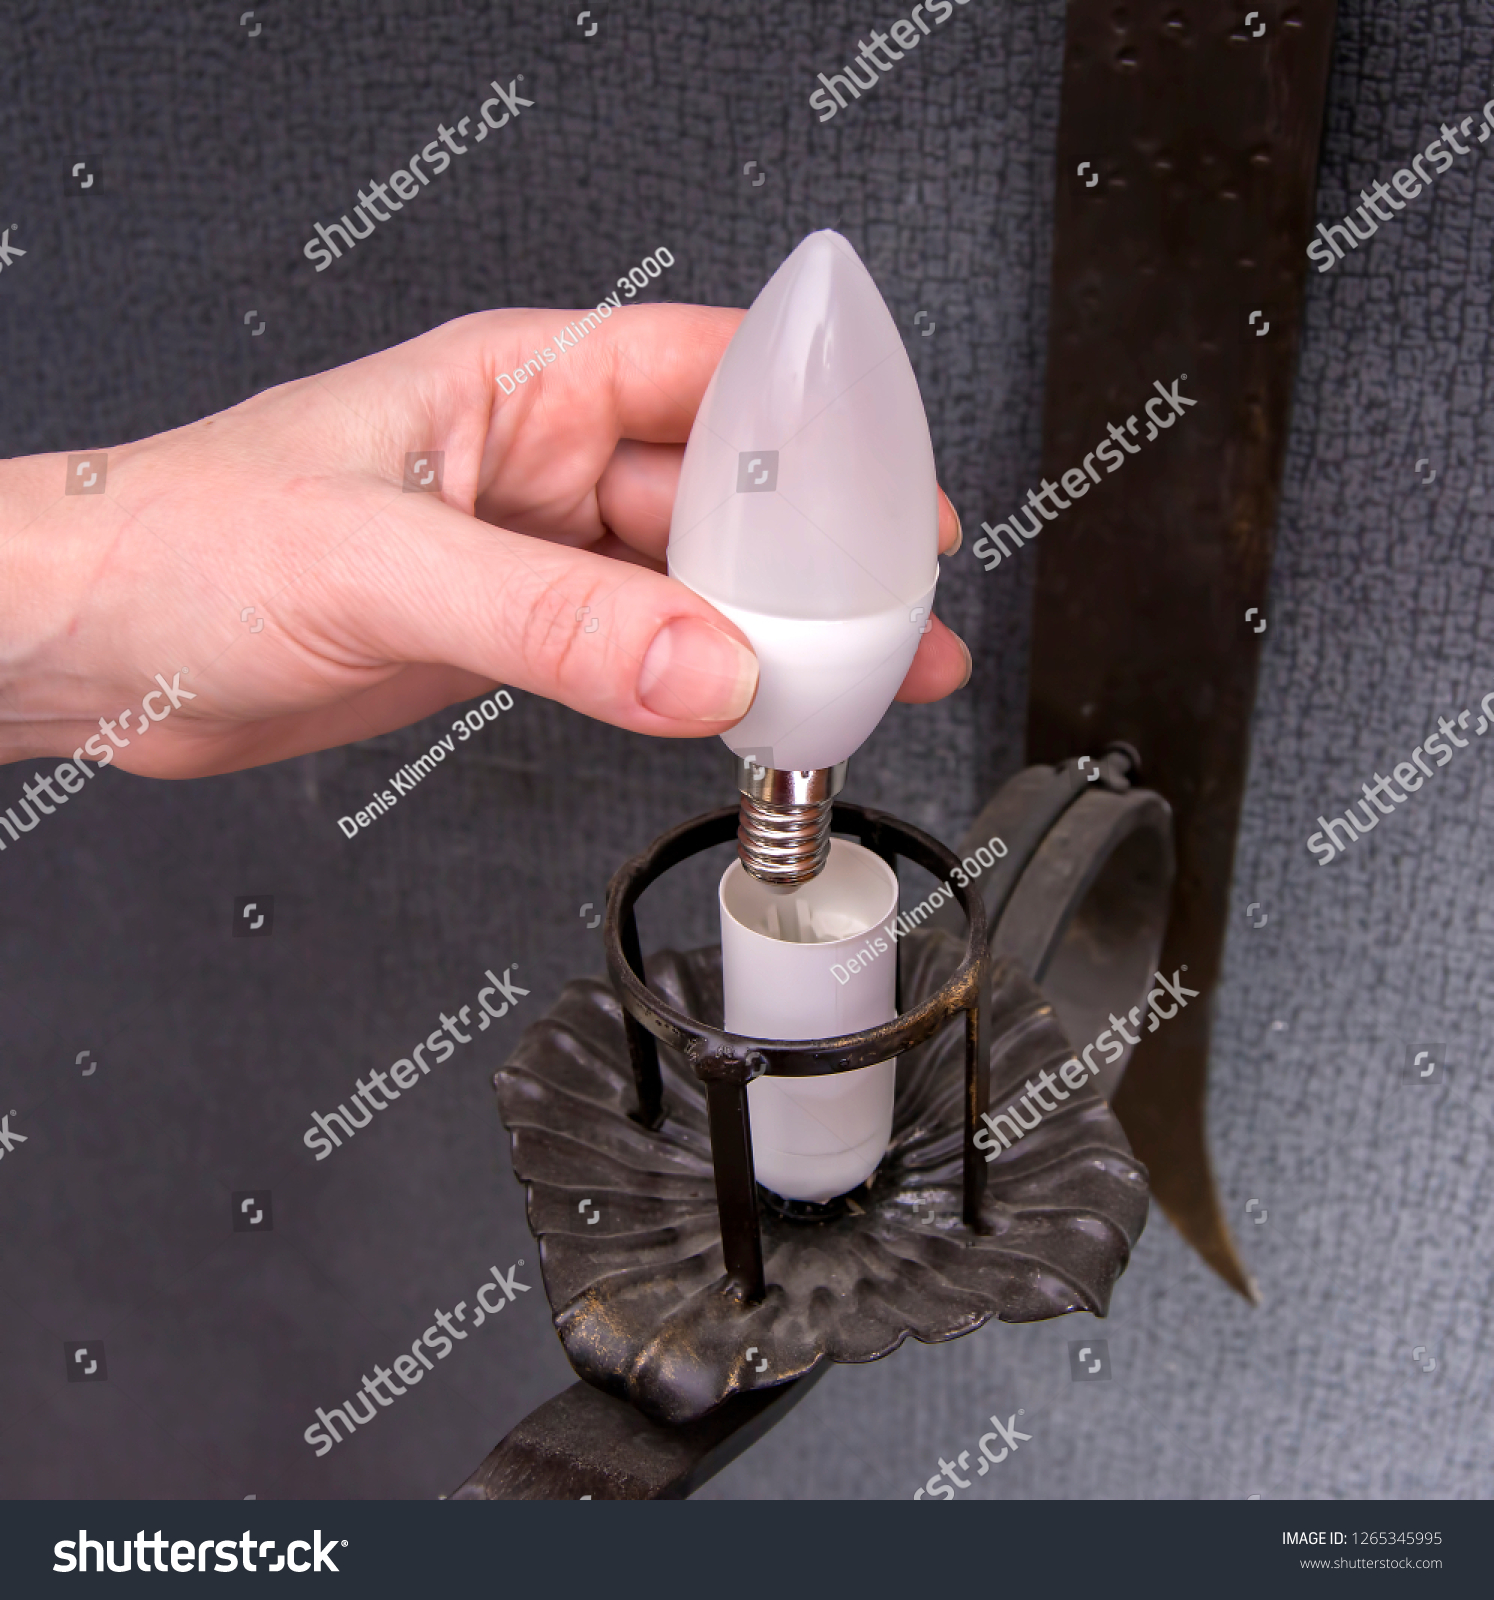 A woman's hand inserts an led light bulb into the wall lamp. #1265345995